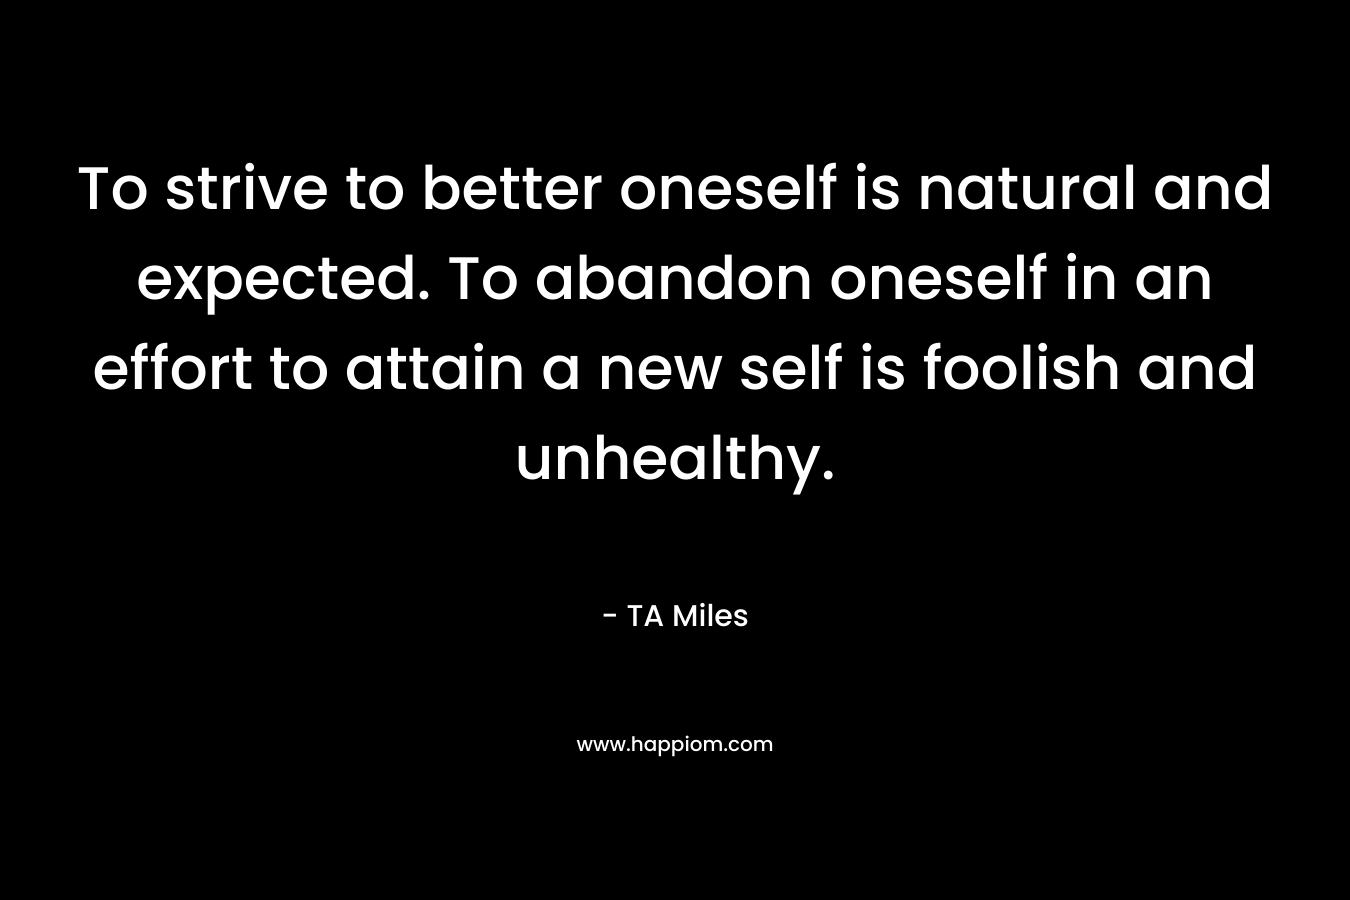 To strive to better oneself is natural and expected. To abandon oneself in an effort to attain a new self is foolish and unhealthy.